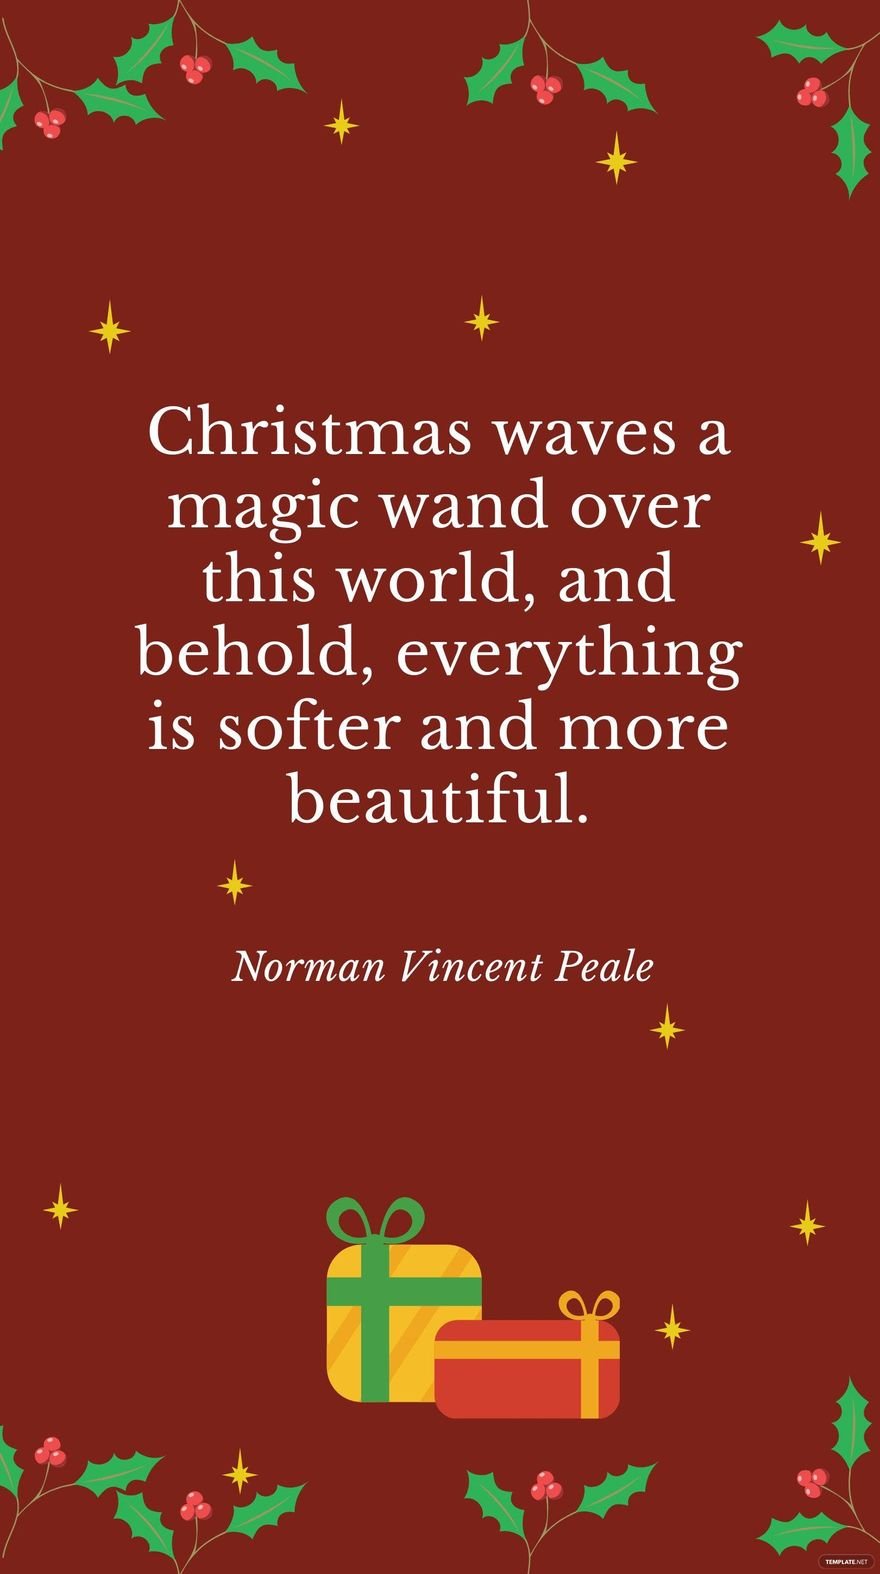 Free Norman Vincent Peale - Christmas waves a magic wand over this world, and behold, everything is softer and more beautiful. in JPG